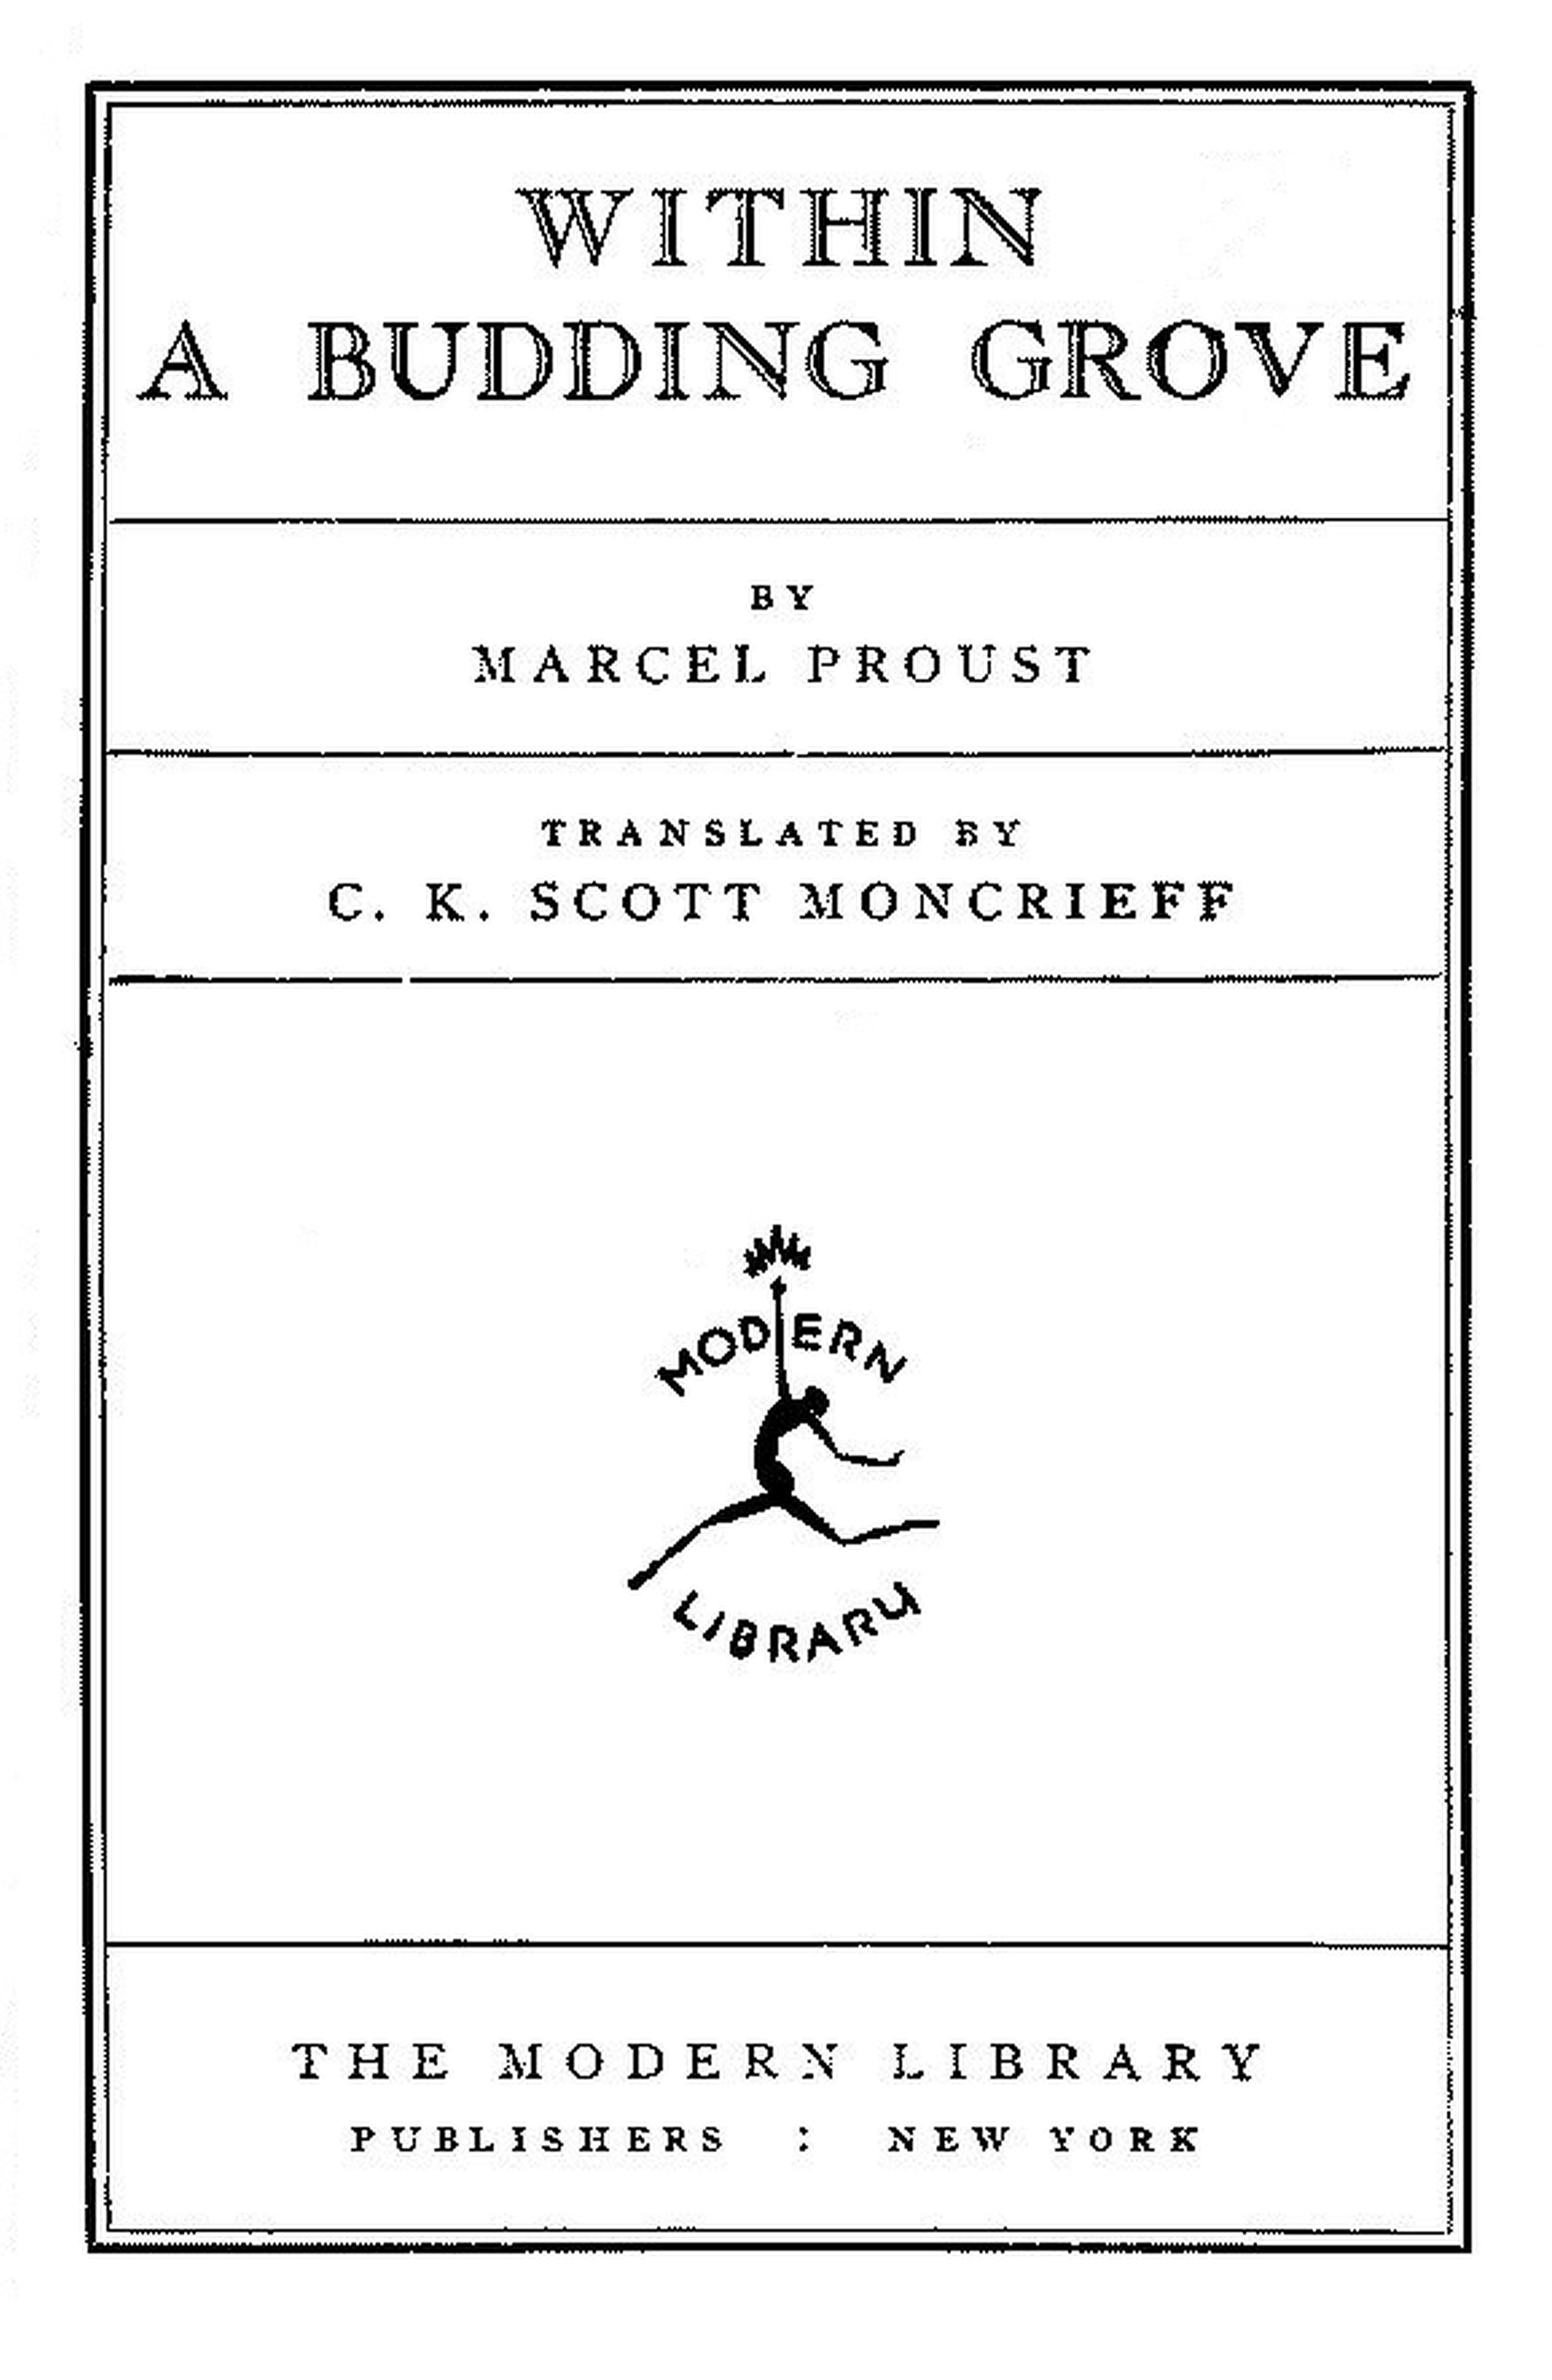 The Project Gutenberg eBook of Within a Budding Grove, by Marcel Proust.